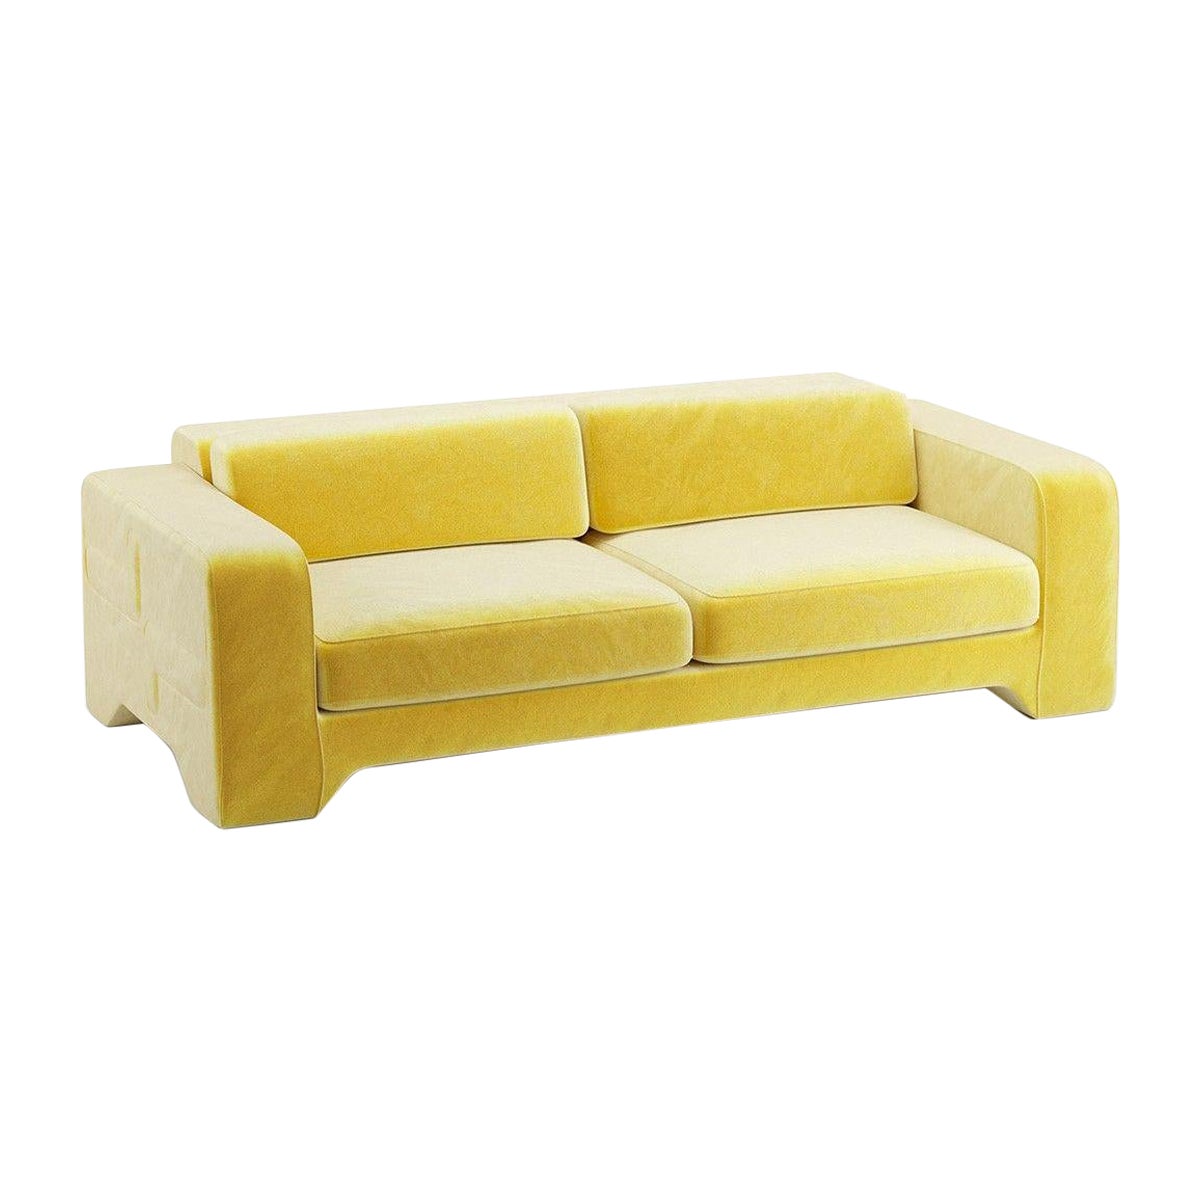 Popus Editions Giovanna 4 Seater Sofa in Yellow Como Velvet Upholstery For Sale